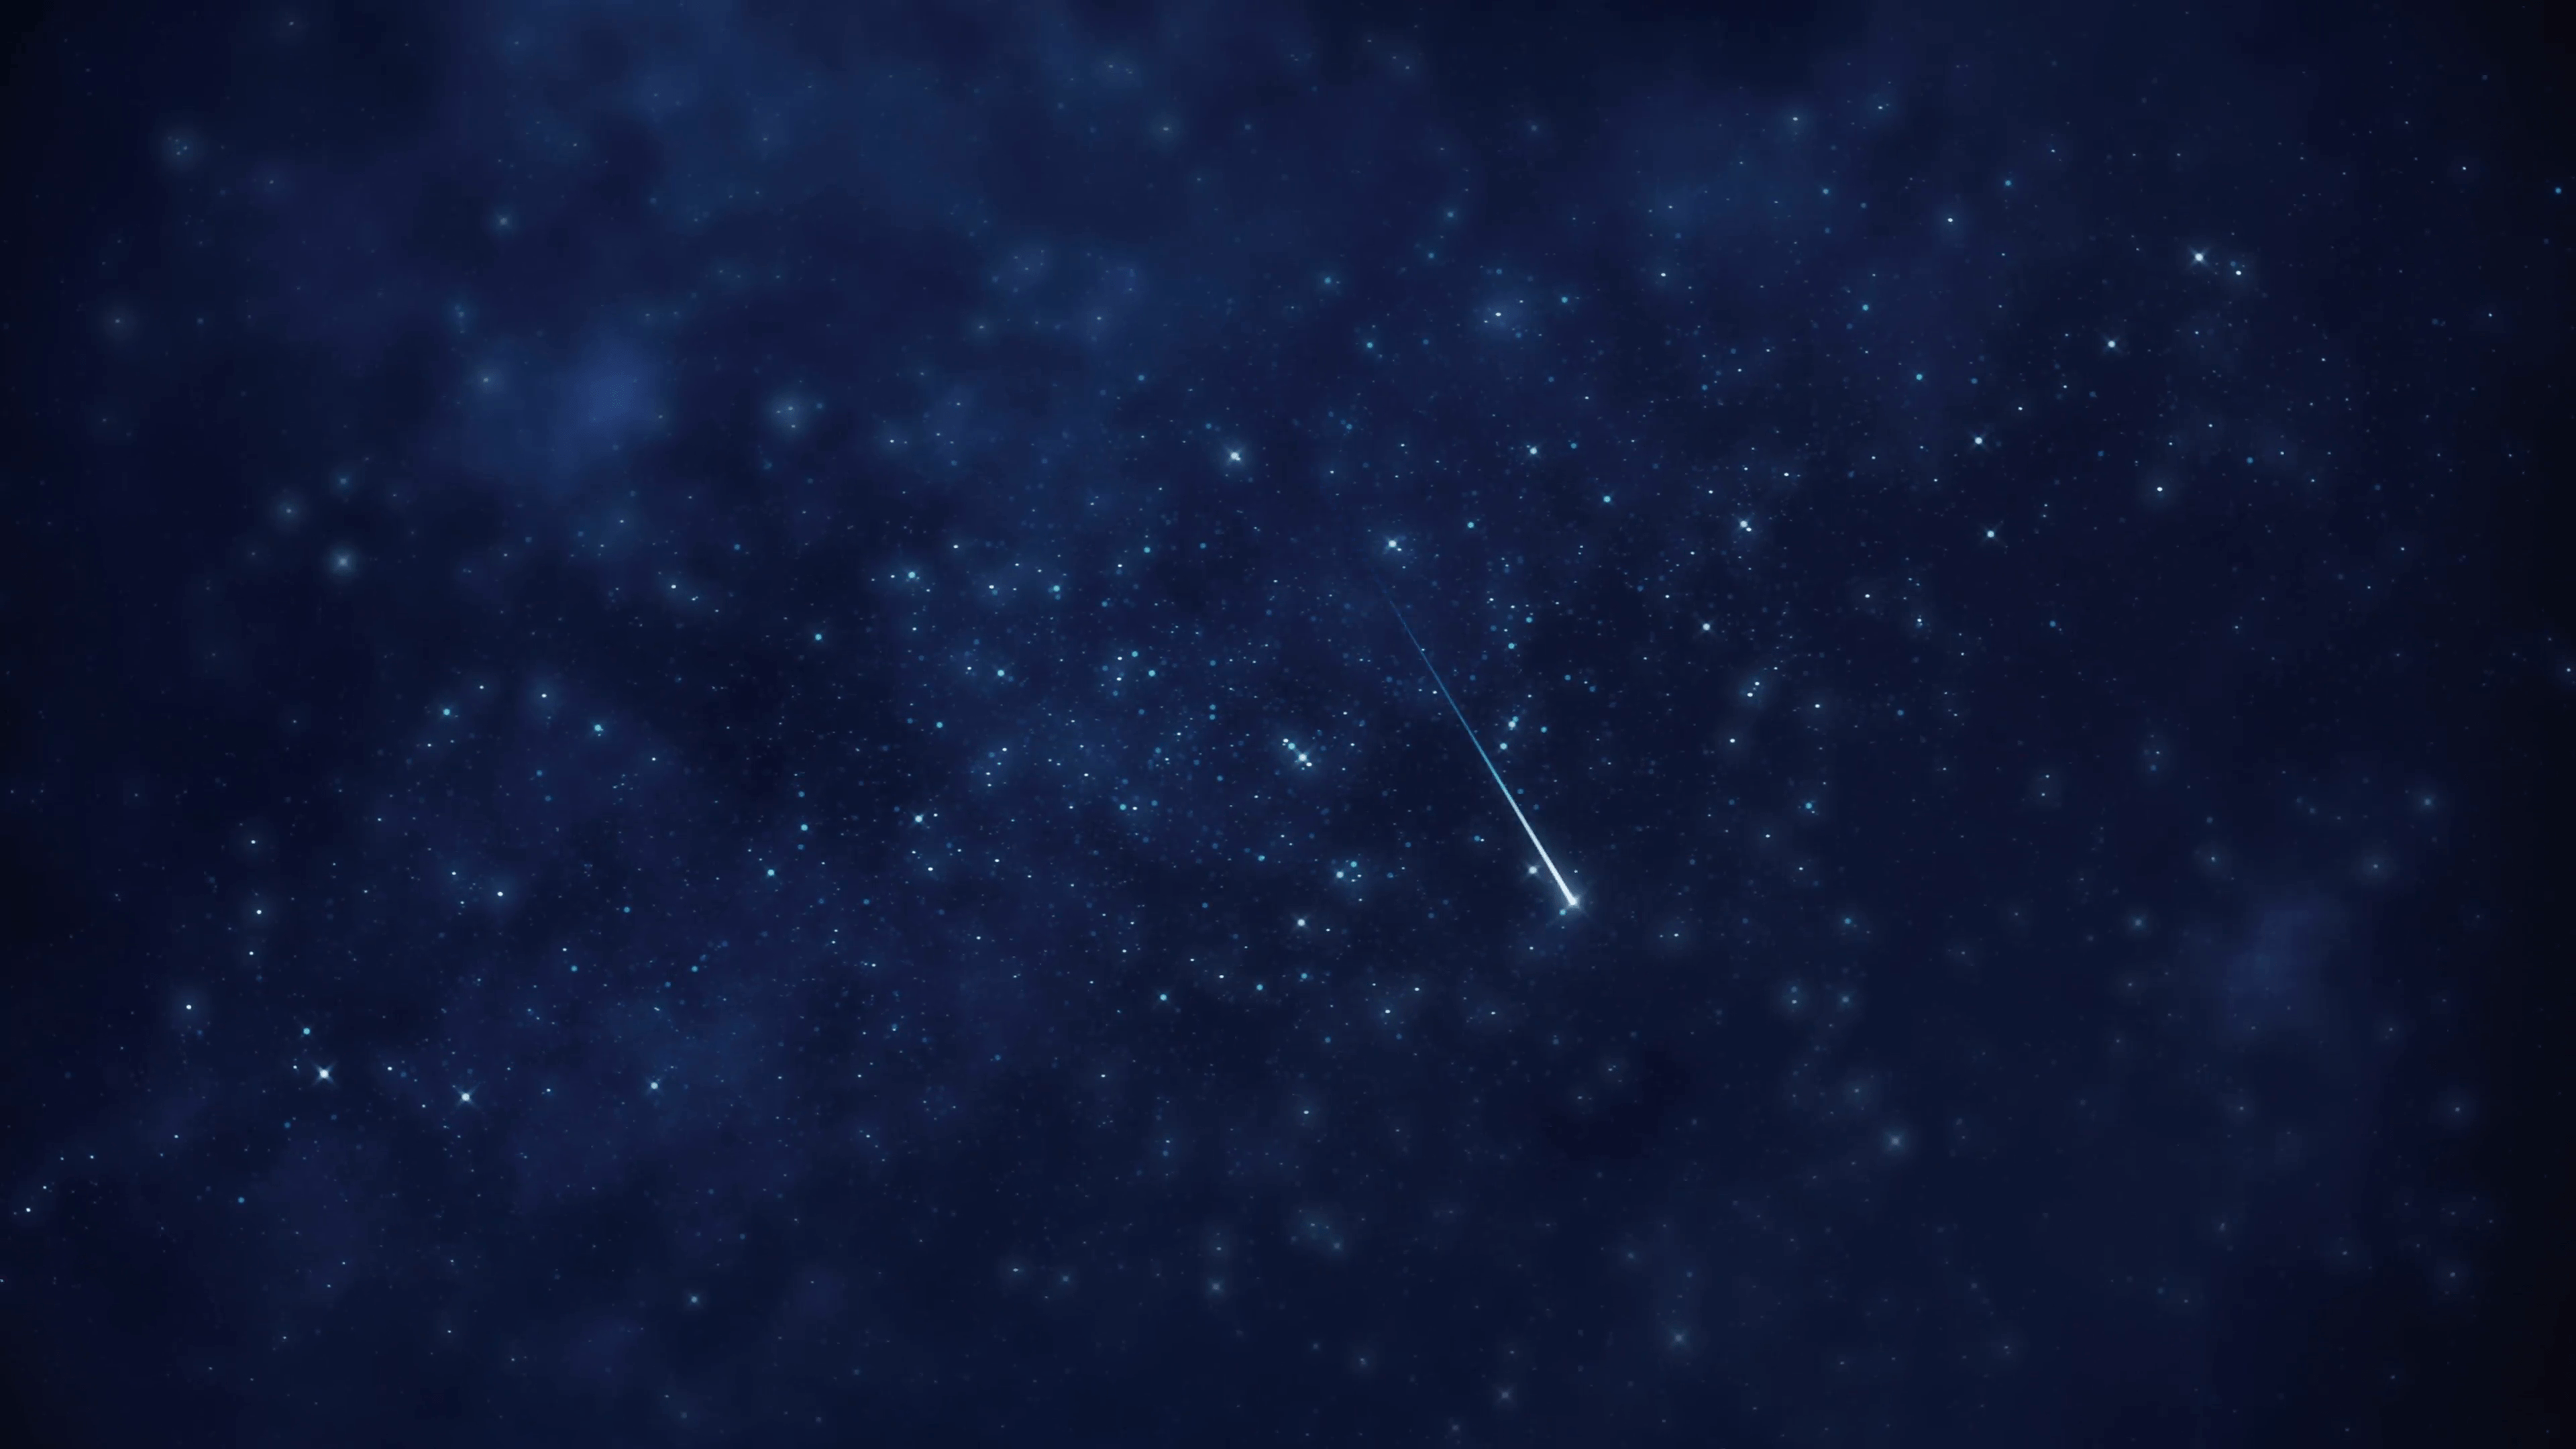 Space Background Images - Wallpaper Cave